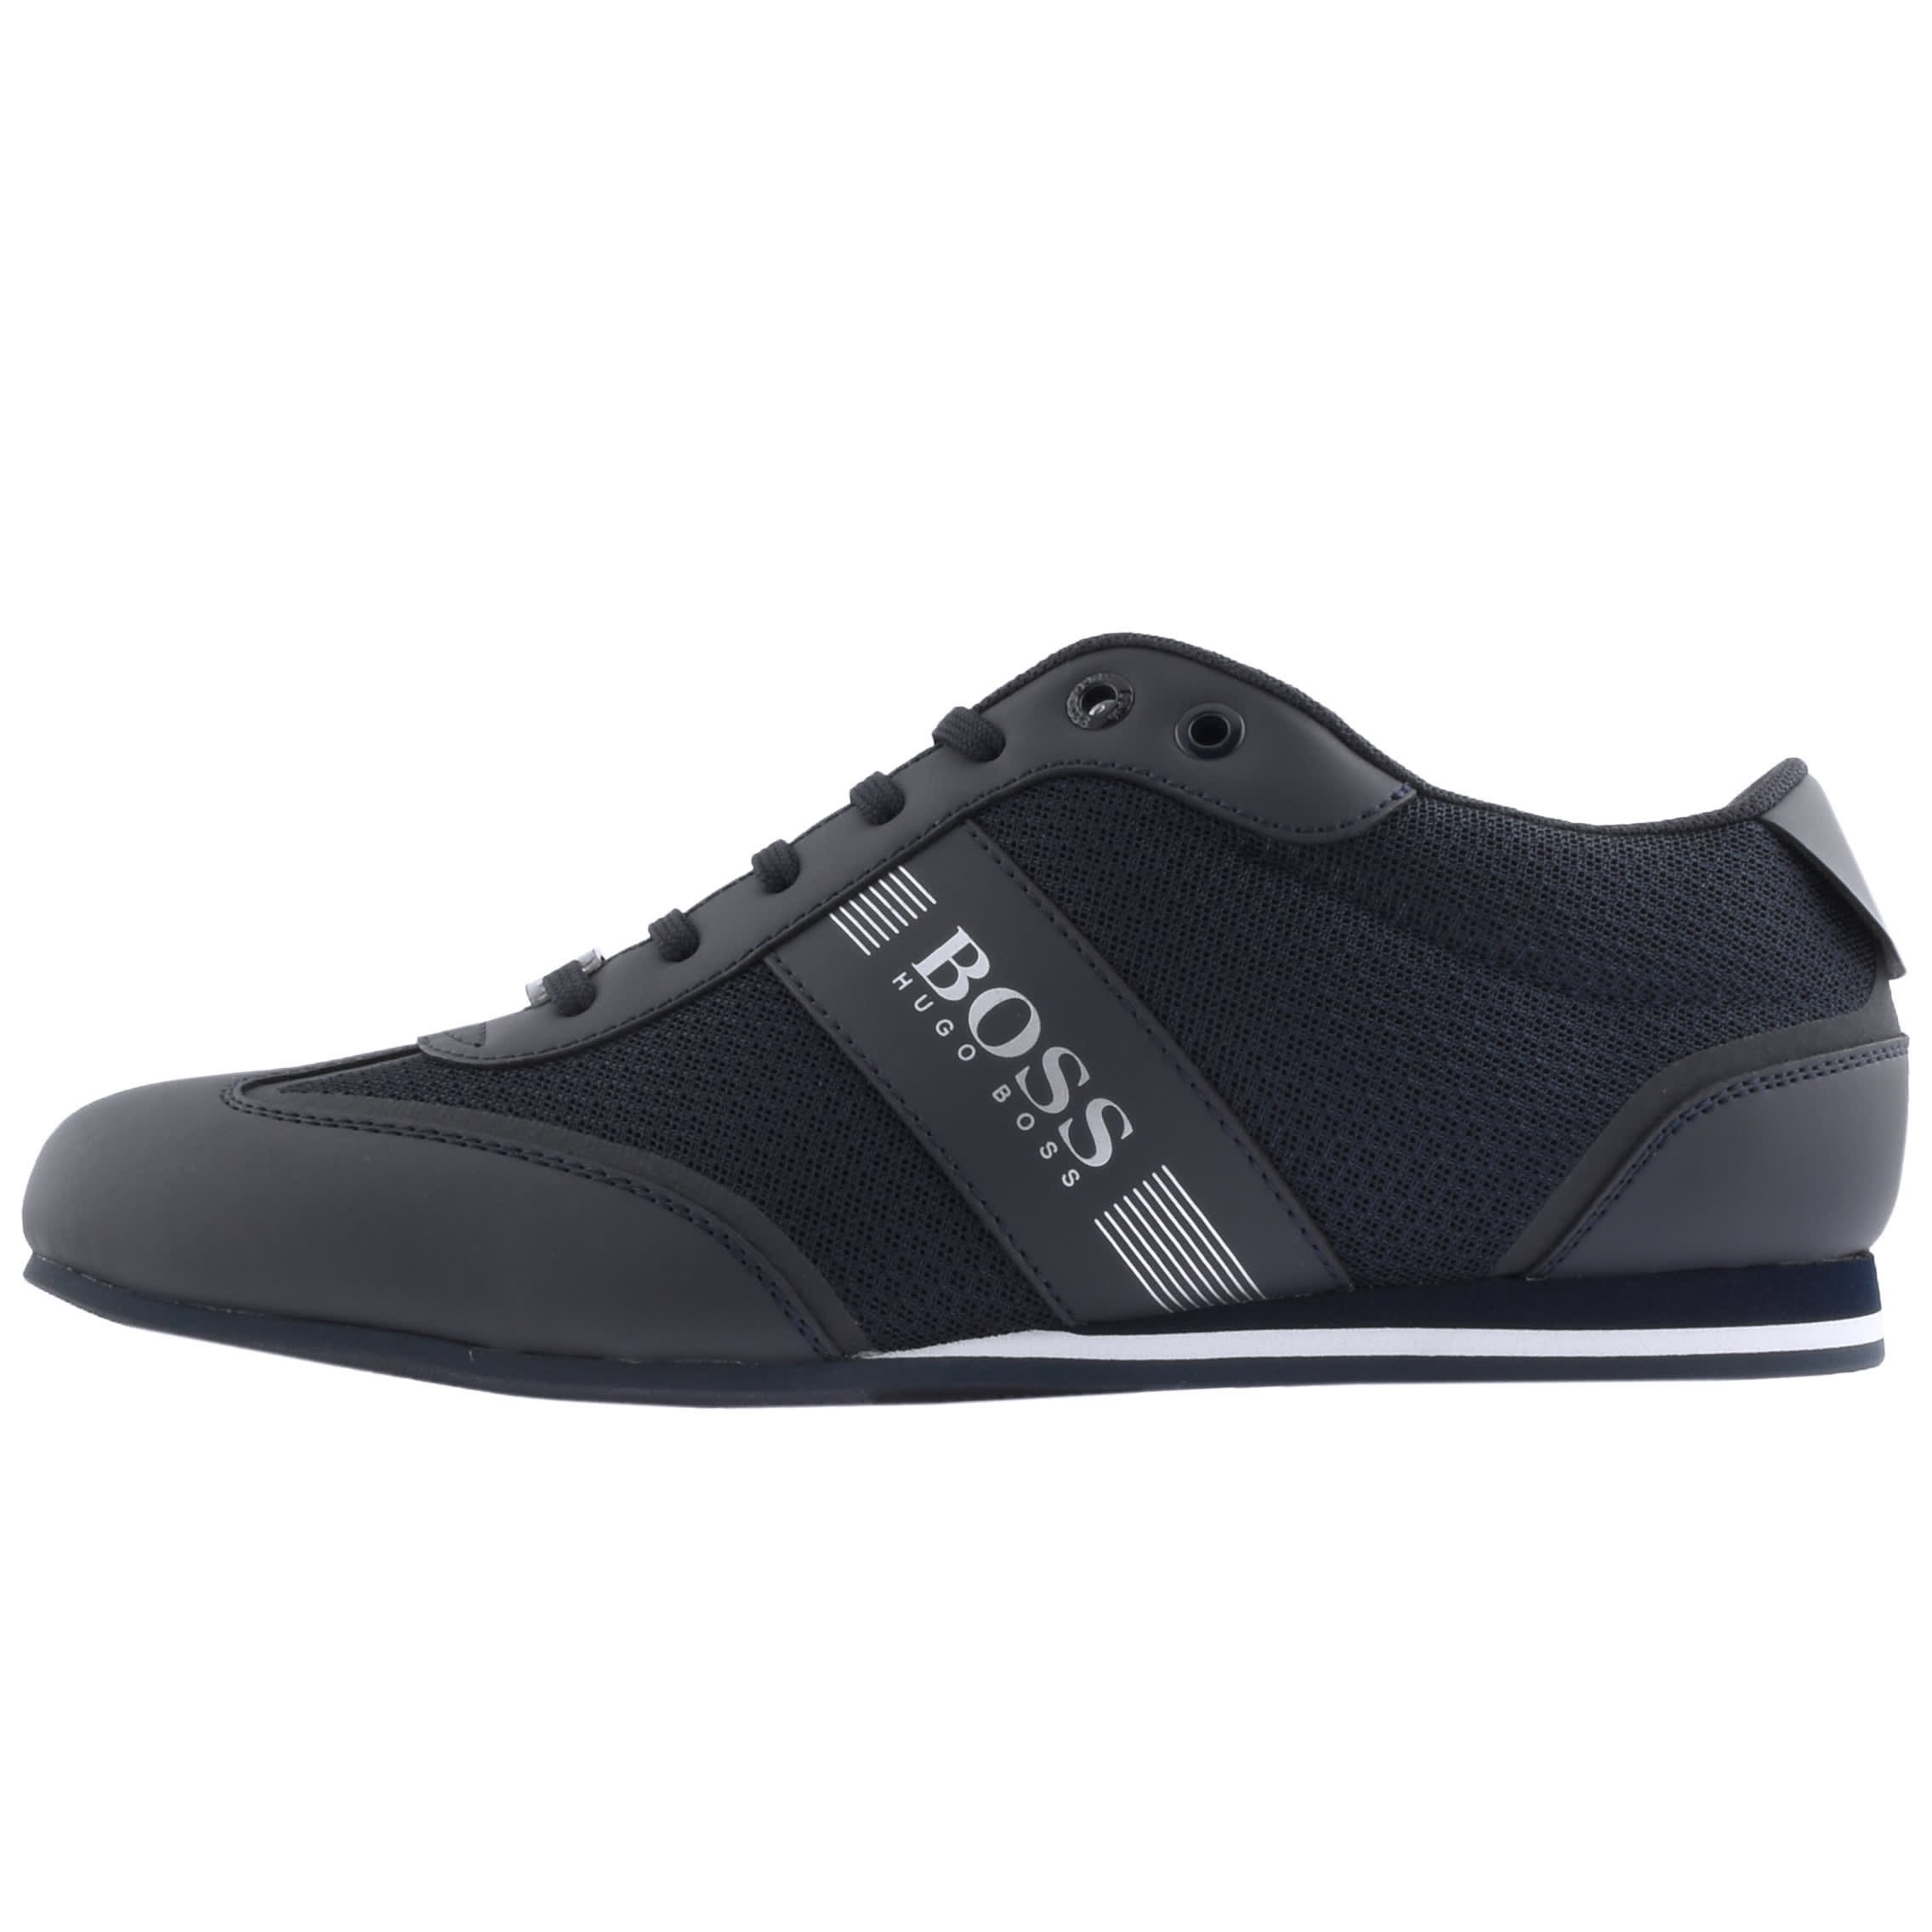 hugo boss trainers sole trader